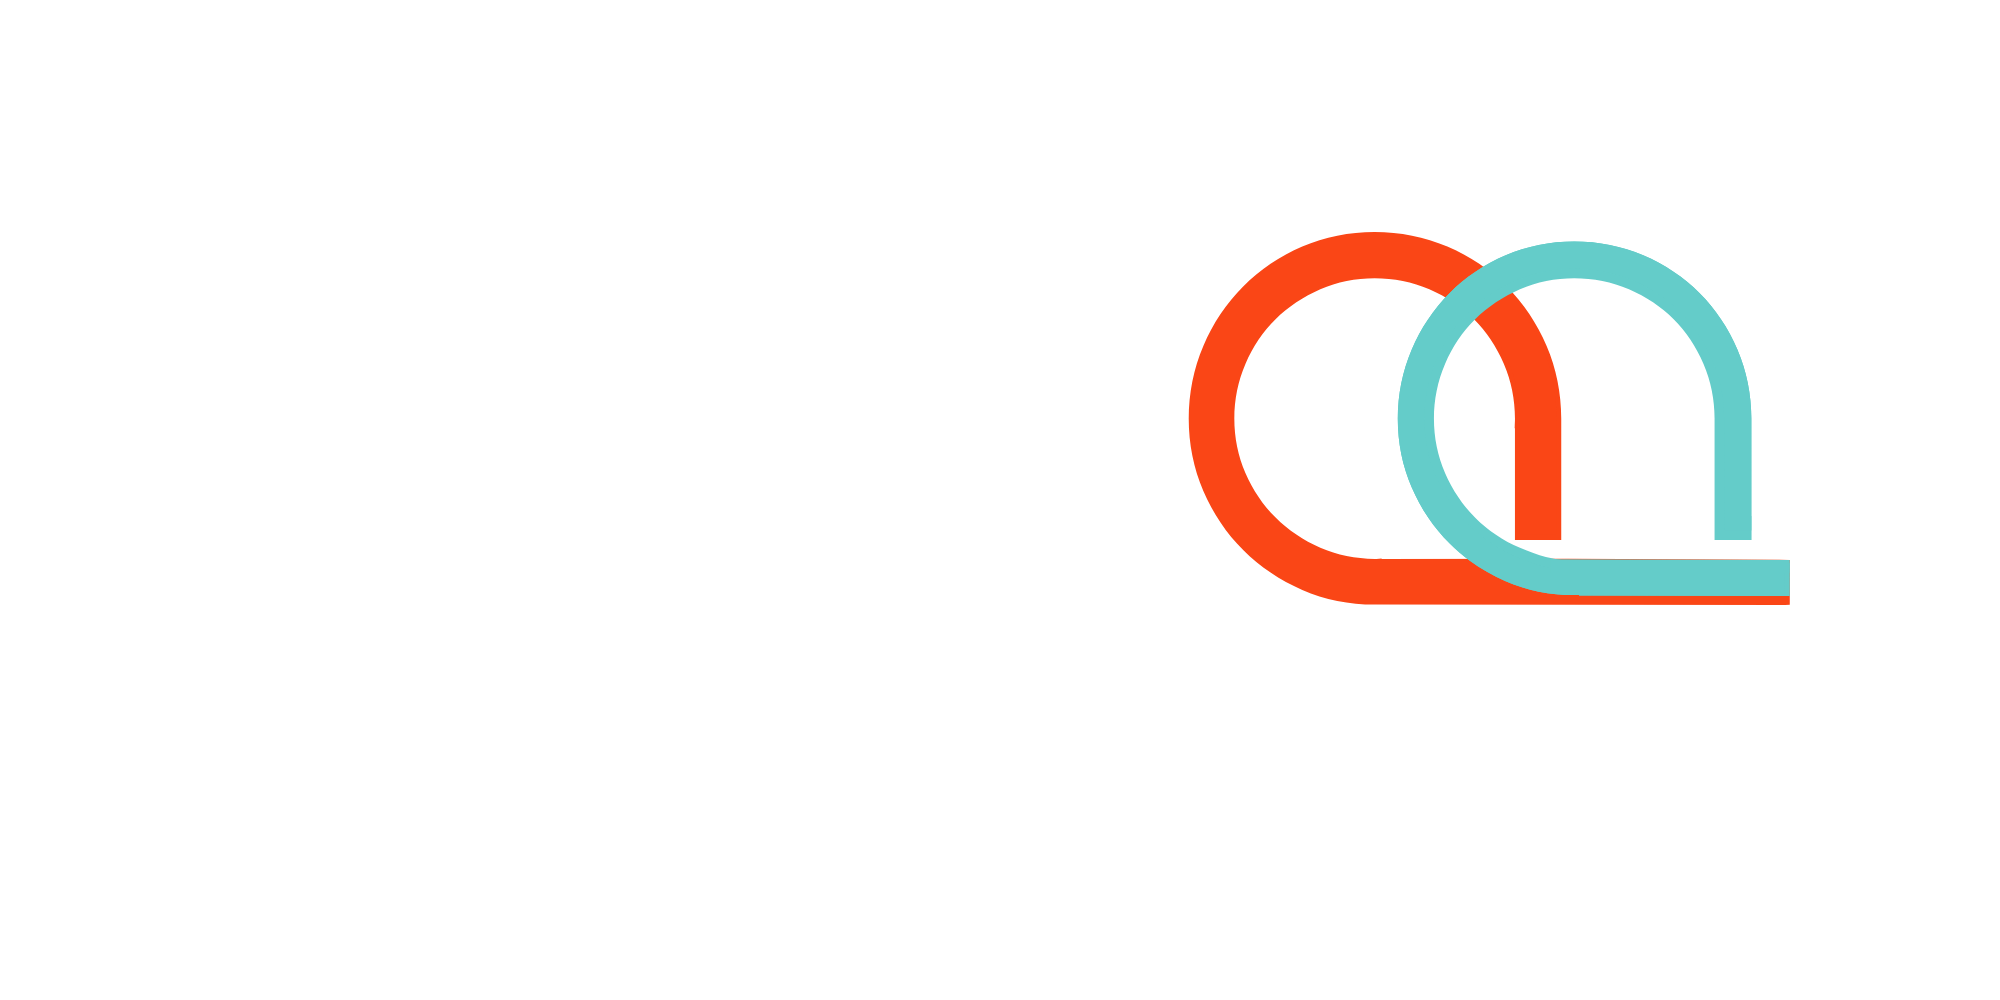 https://cdn.shopify.com/s/files/1/0278/2540/6035/files/Copy_of_logo_in_white_png_transparent.png?v=1665592353